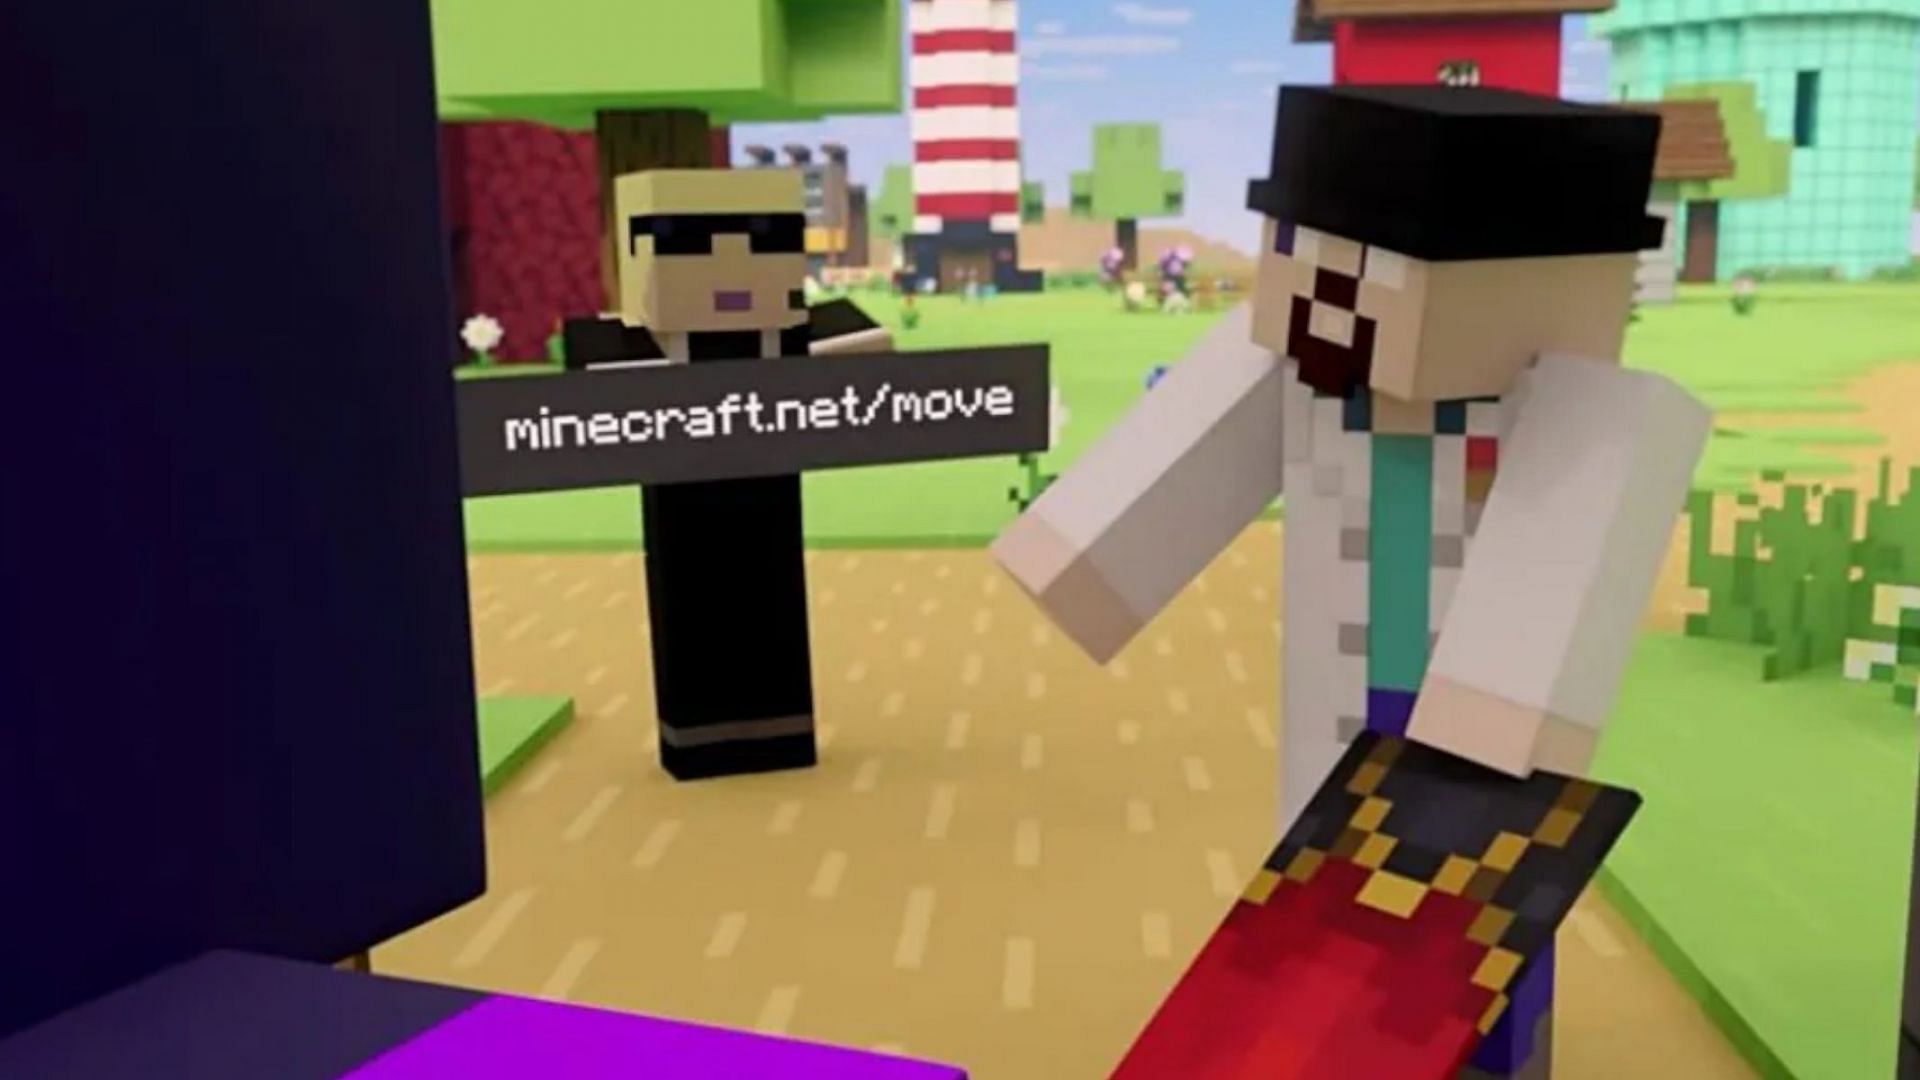 Dinnerbone&#039;s announcement video for account migrations (Image via Minecraft&#039;s official YouTube channel)